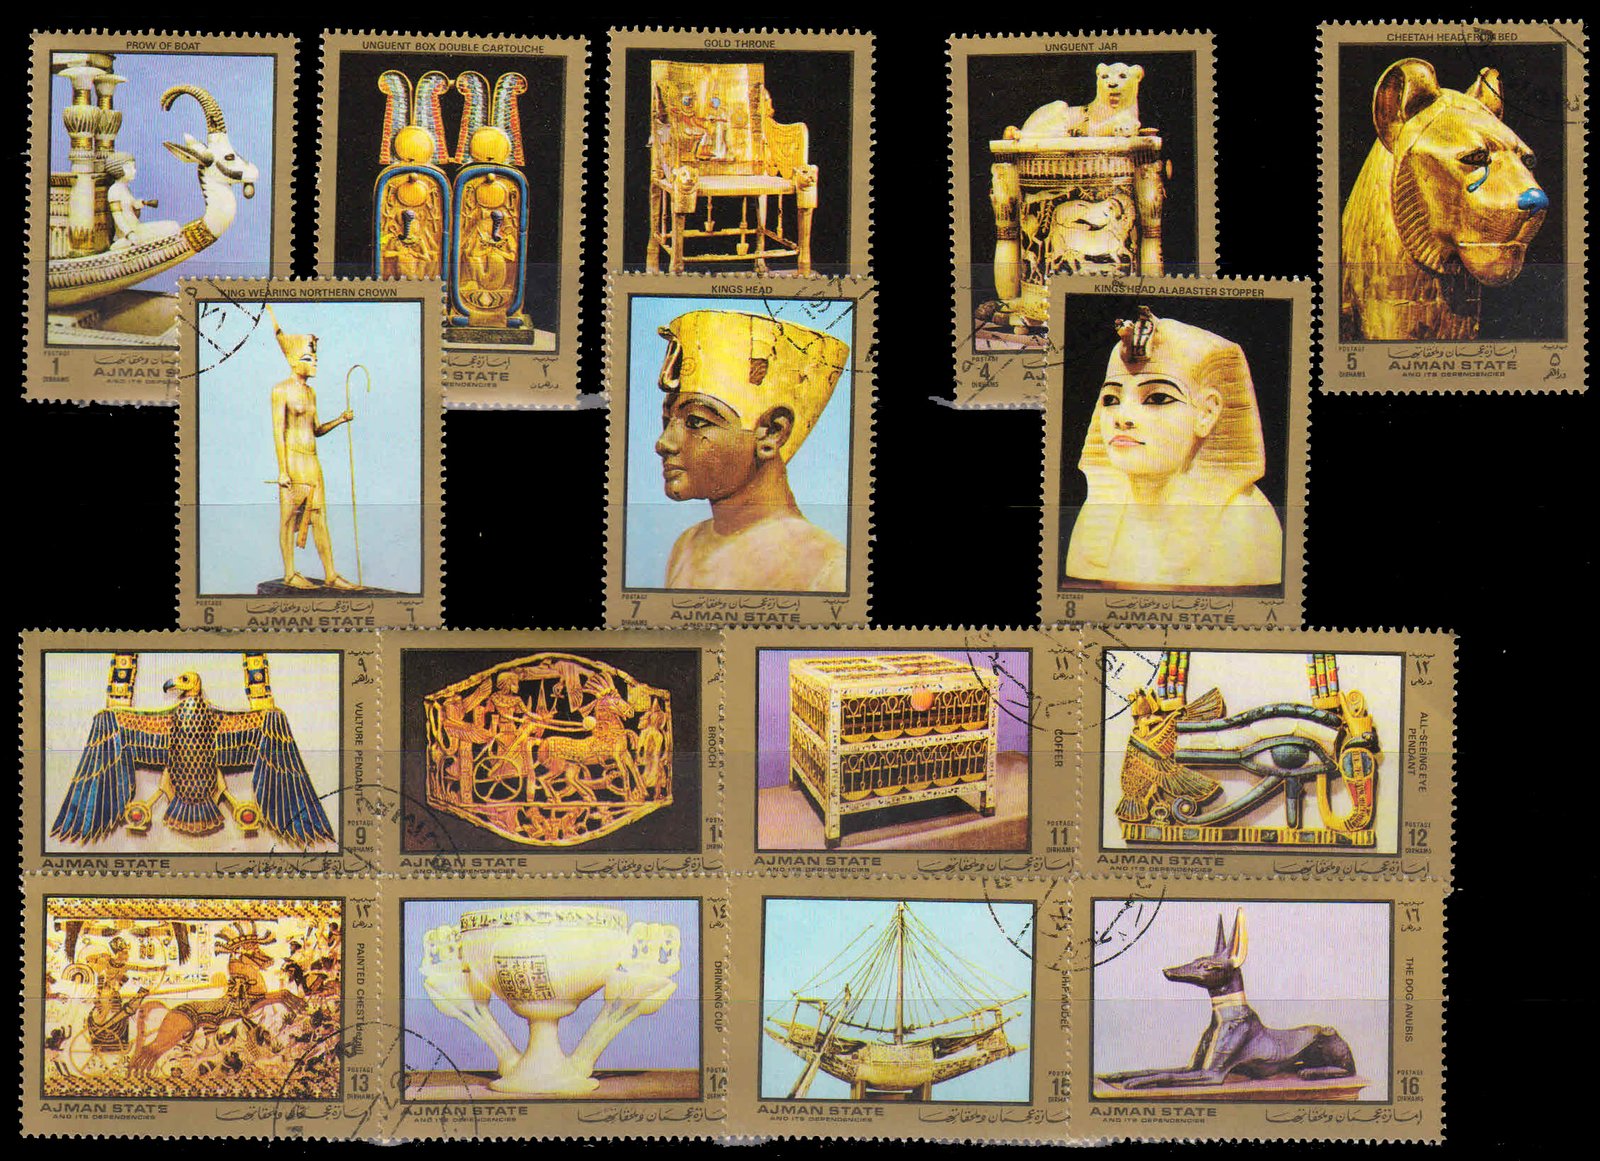 AJMAN STATE 1971 - 50th Anniversary Opening Tomb of Tutankhamen Nov 1922 by Lord Carnarvon and Howard Carter, Set of 16, Used Stamps